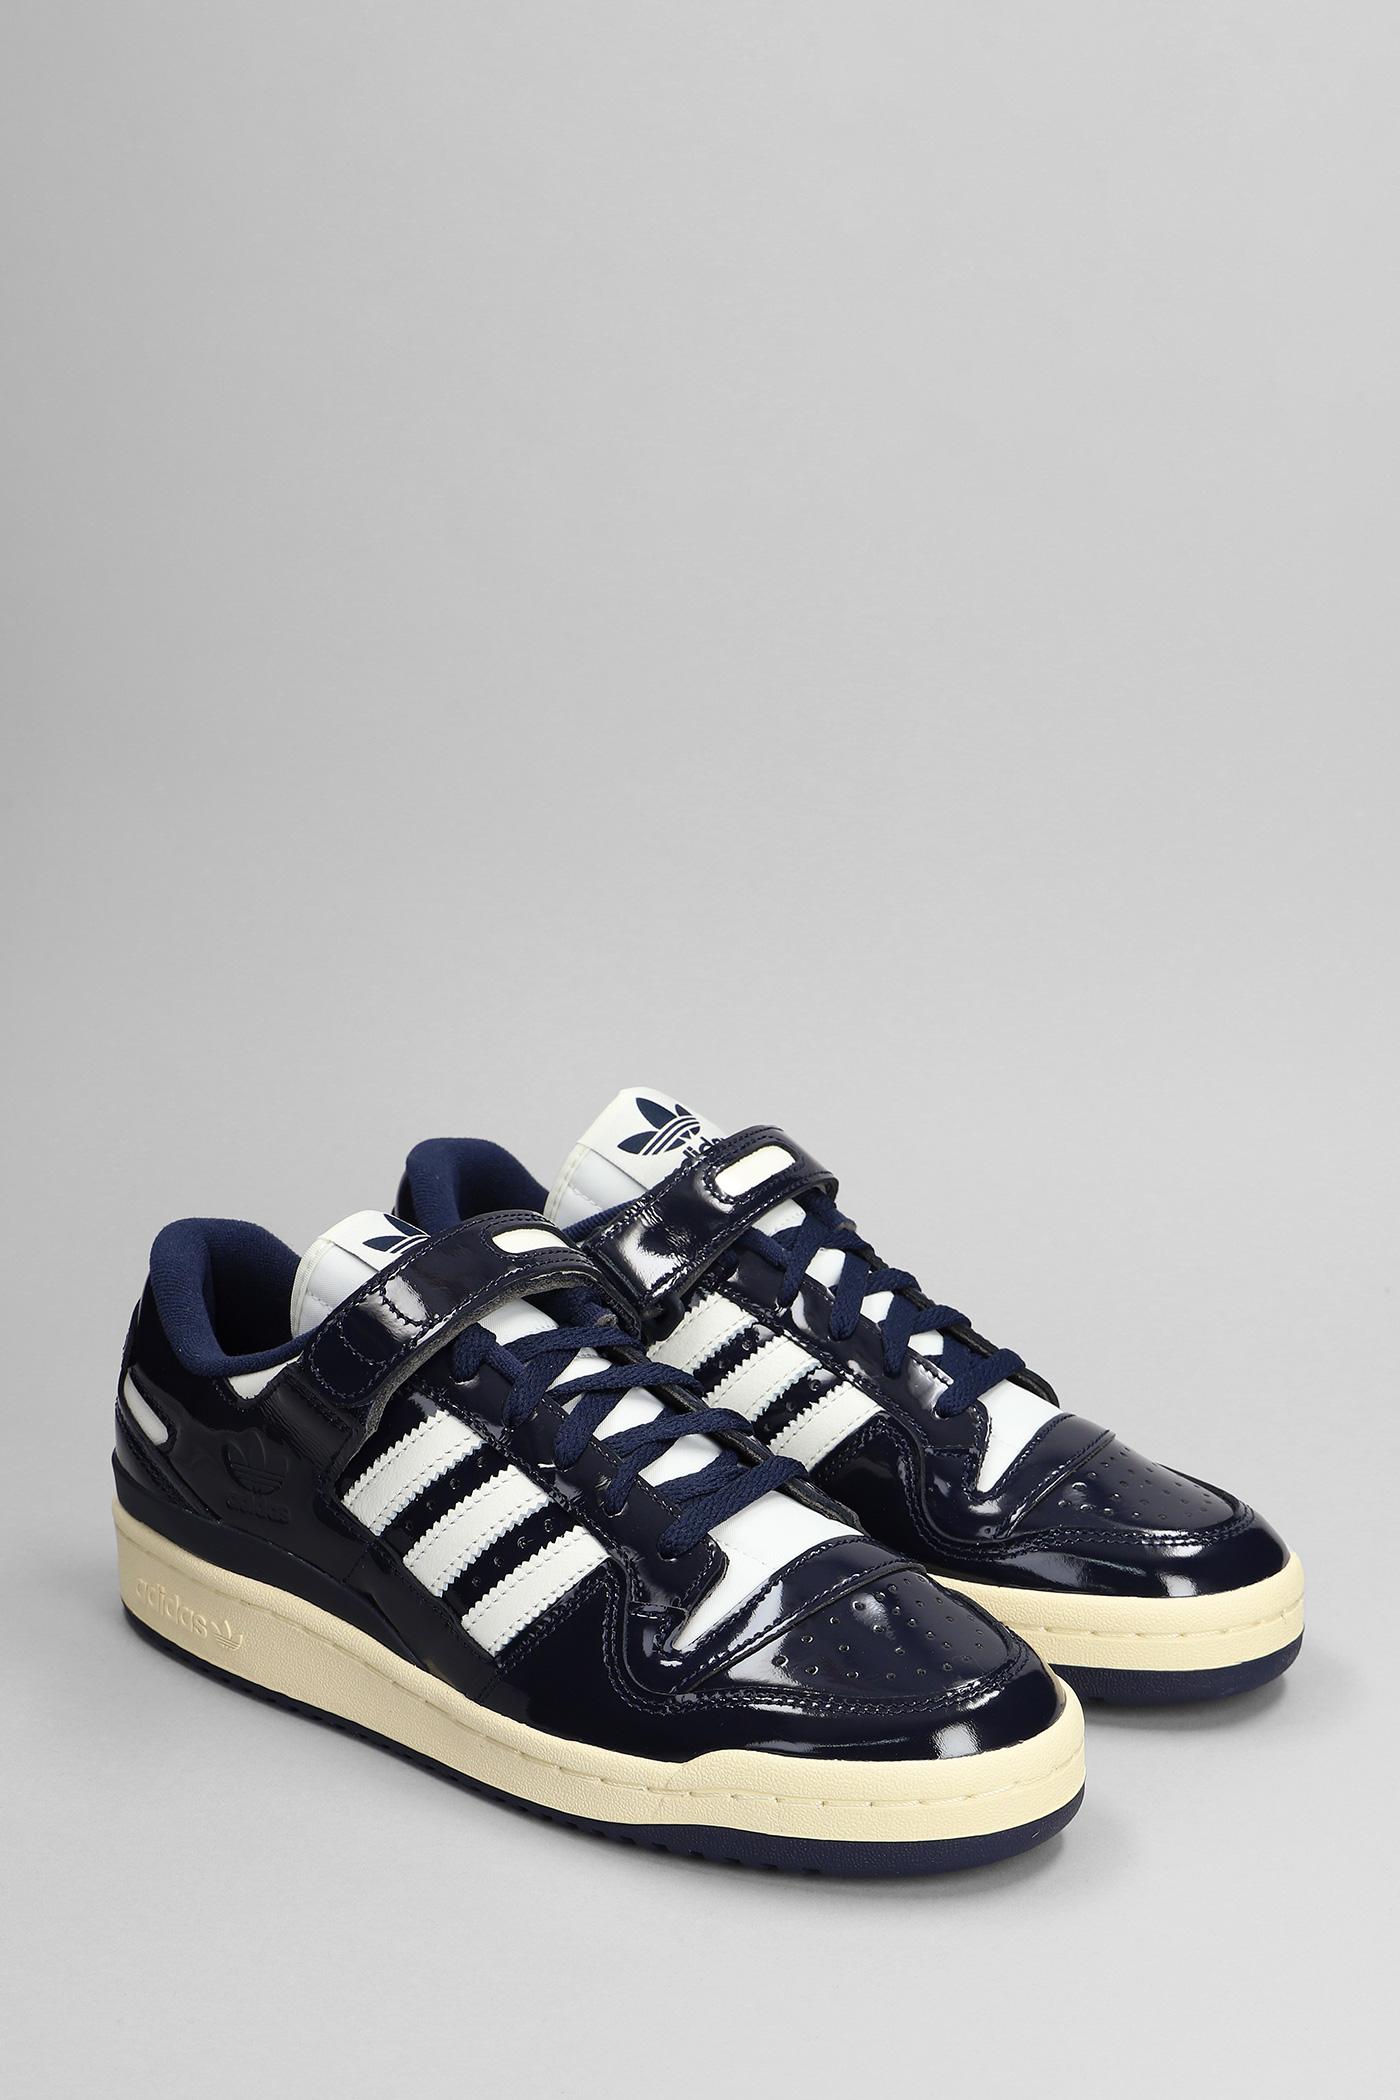 adidas Forum 84 Sneakers In Blue Patent Leather for Men | Lyst